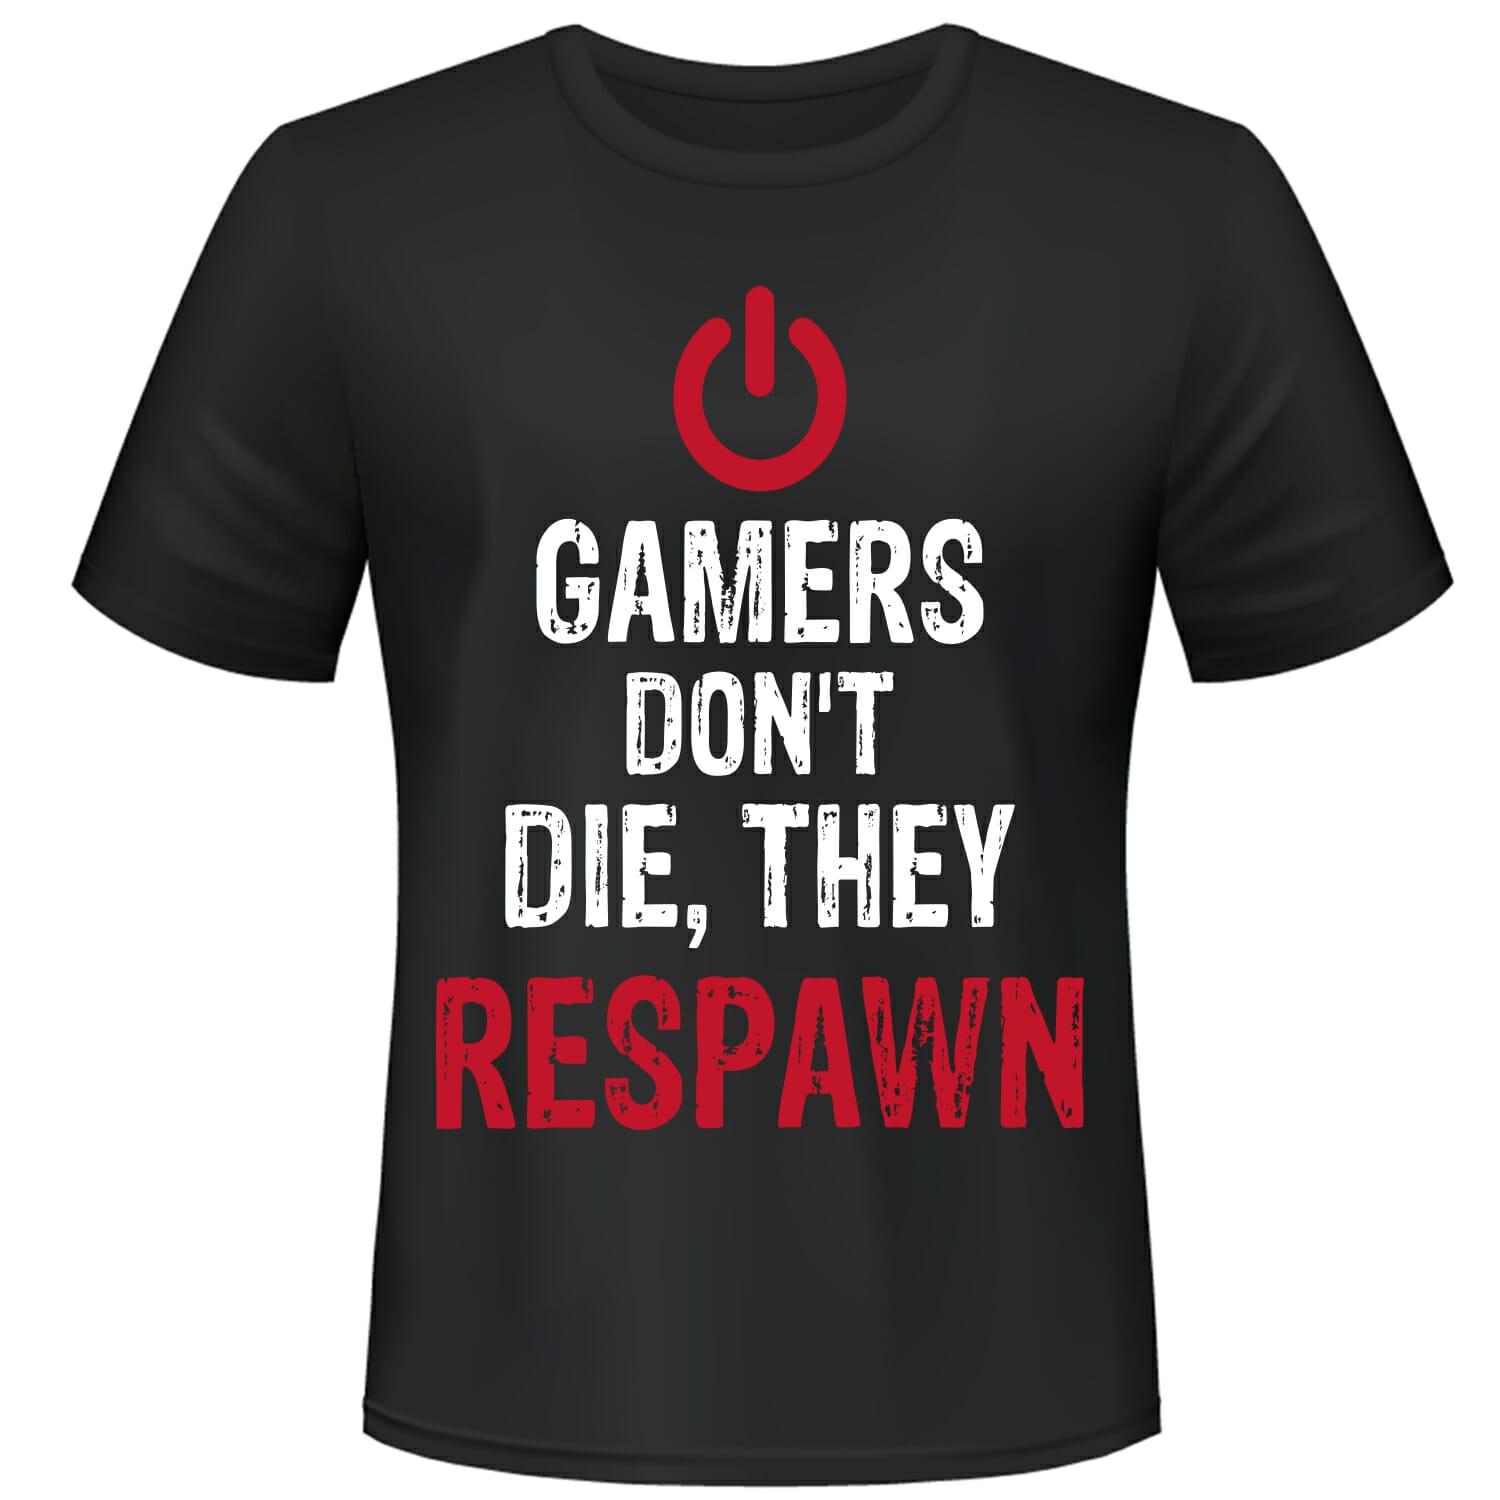 gamers don't die they respawn tshirt design